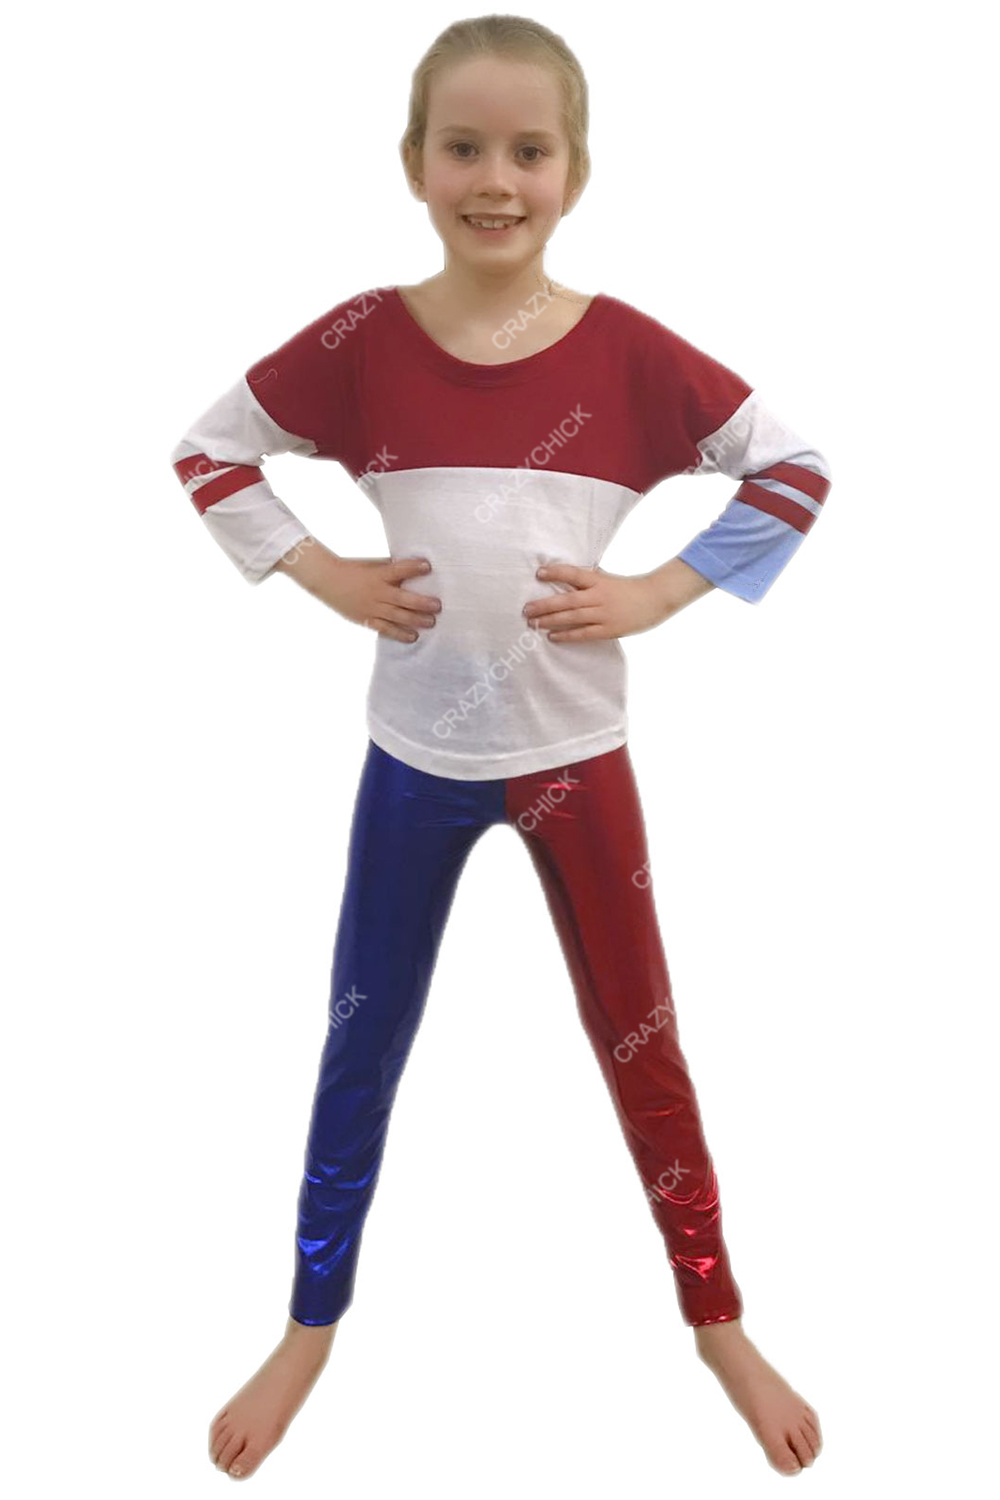 Crazy Chick Girls Shiny Metallic Red and Blue Leggings